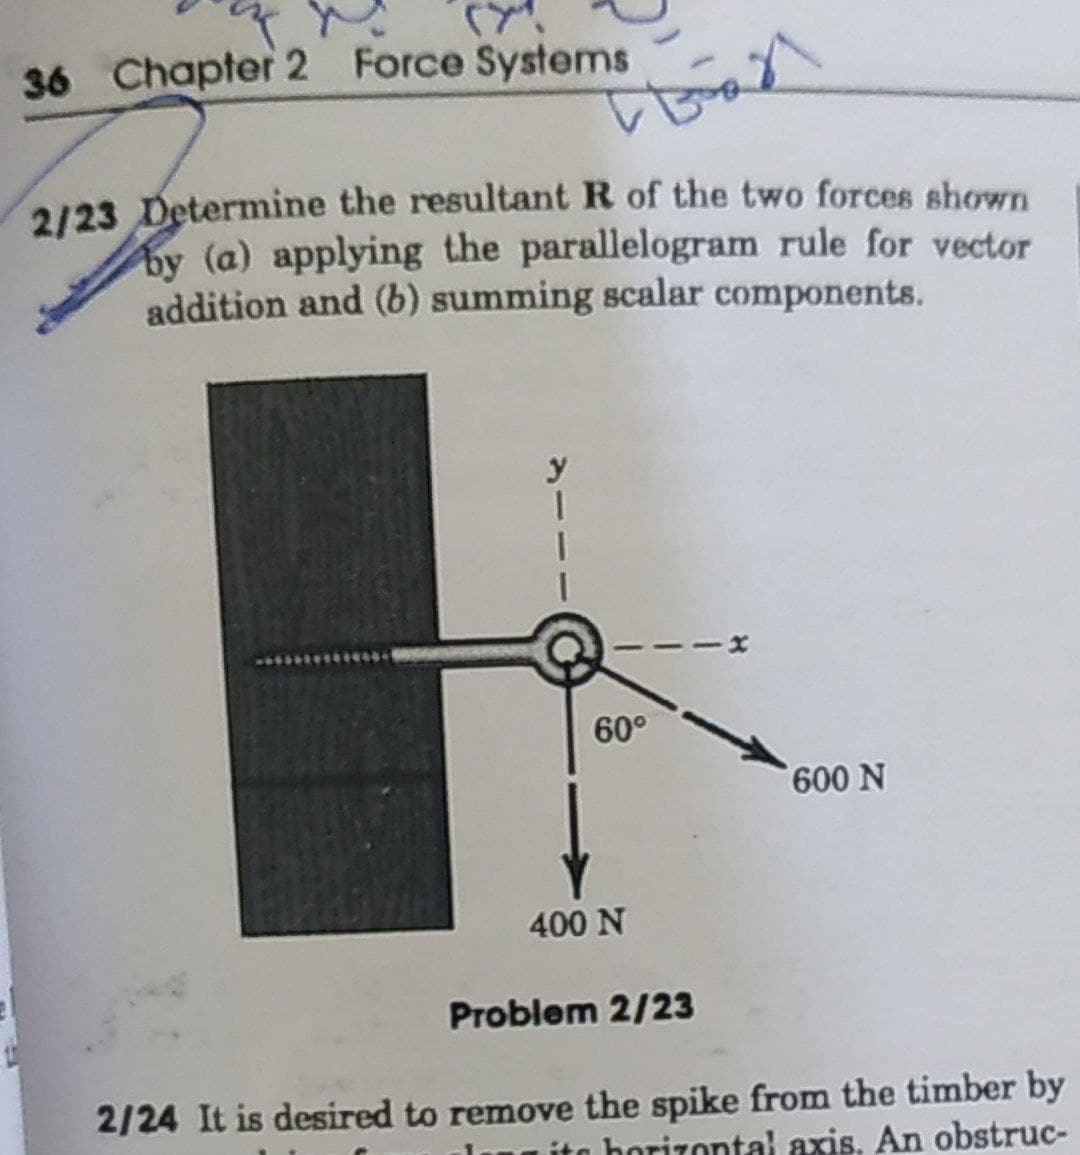 36 Chapter 2 Force Systems
2/23 Determine the resultant R of the two forces shown
by (a) applying the parallelogram rule for vector
addition and (b) summing scalar components.
60°
400 N
Problem 2/23
2/24 It is desired to remove the spike from the timber by
horizontal axis. An obstruc-
